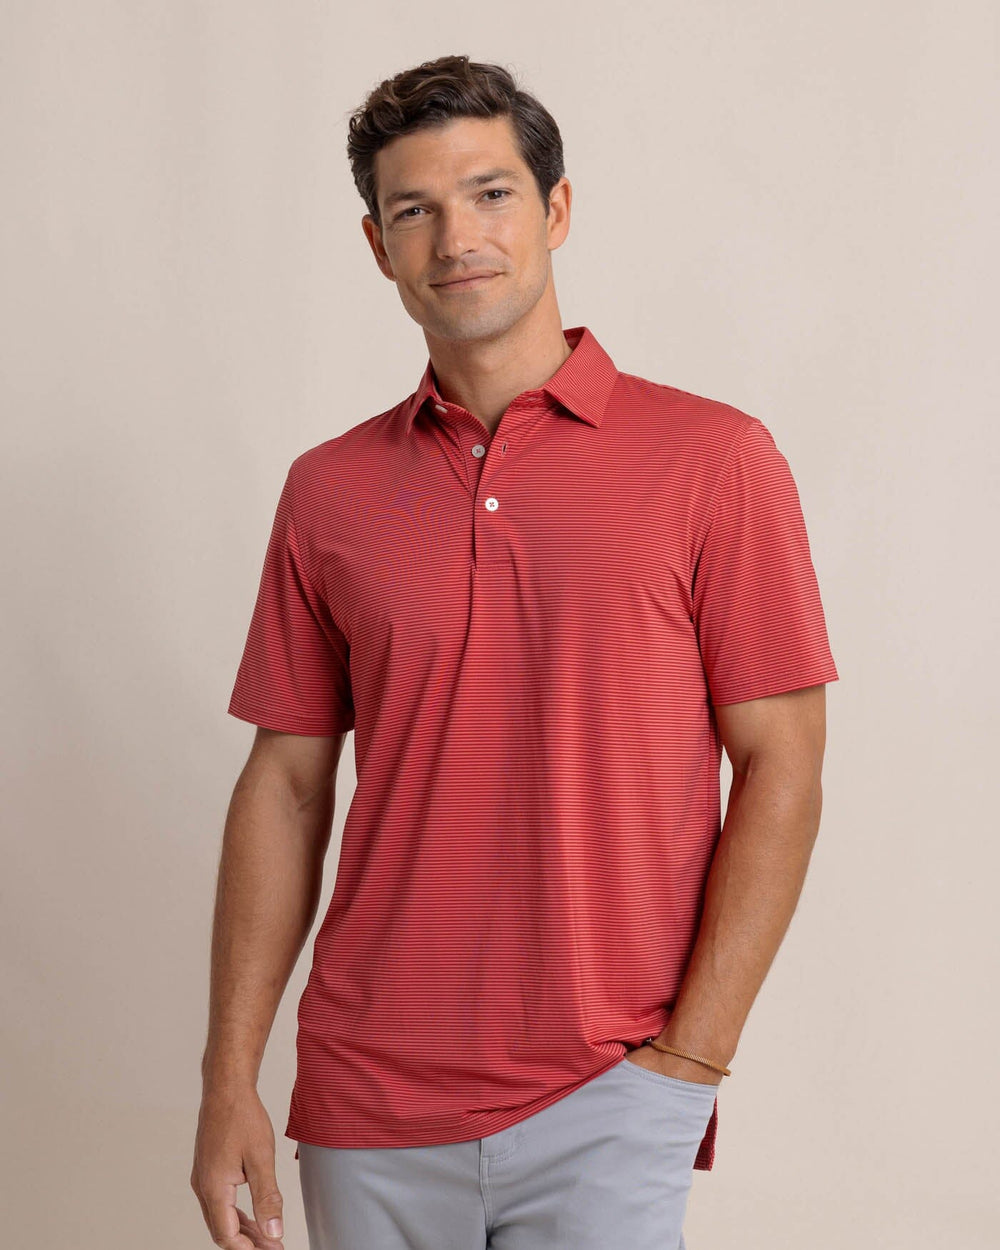 The front view of the Southern Tide brrr-eeze Meadowbrook Stripe Polo by Southern Tide - Mineral Red